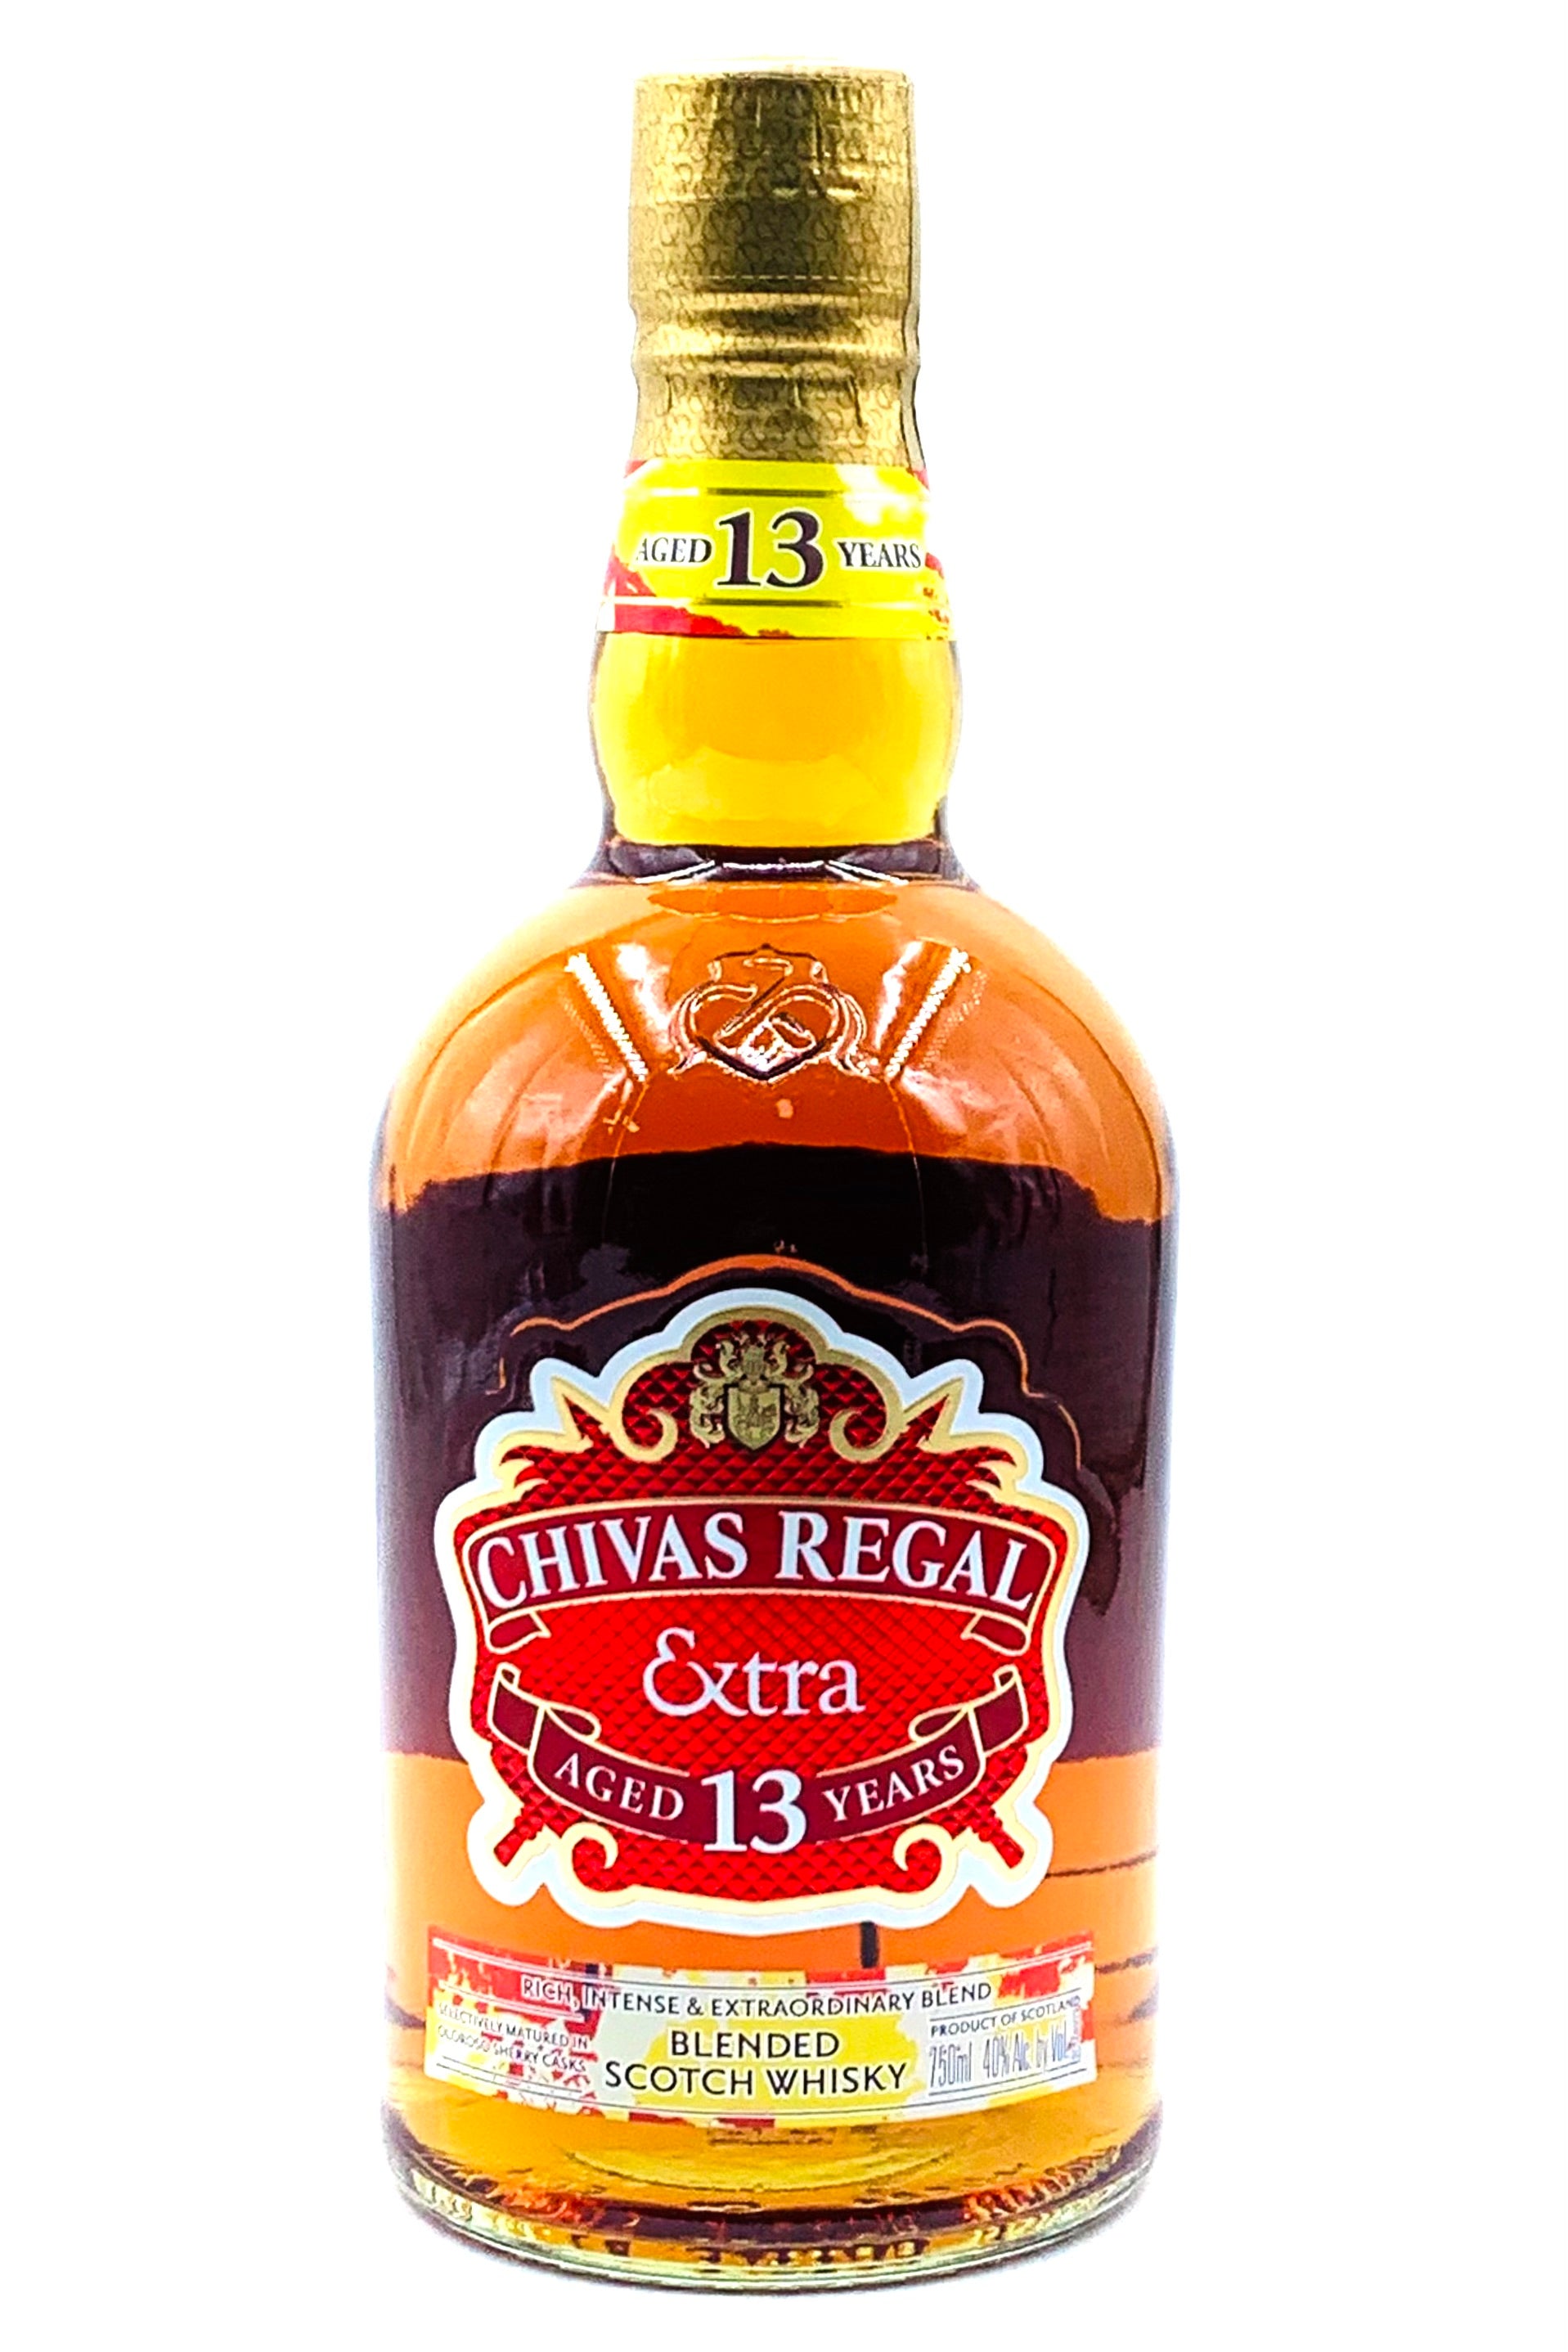 Chivas Regal Extra 13 Year Old Olorosso Sherry Casks Scotch Whisky -  Blackwell'S Wines & Spirits